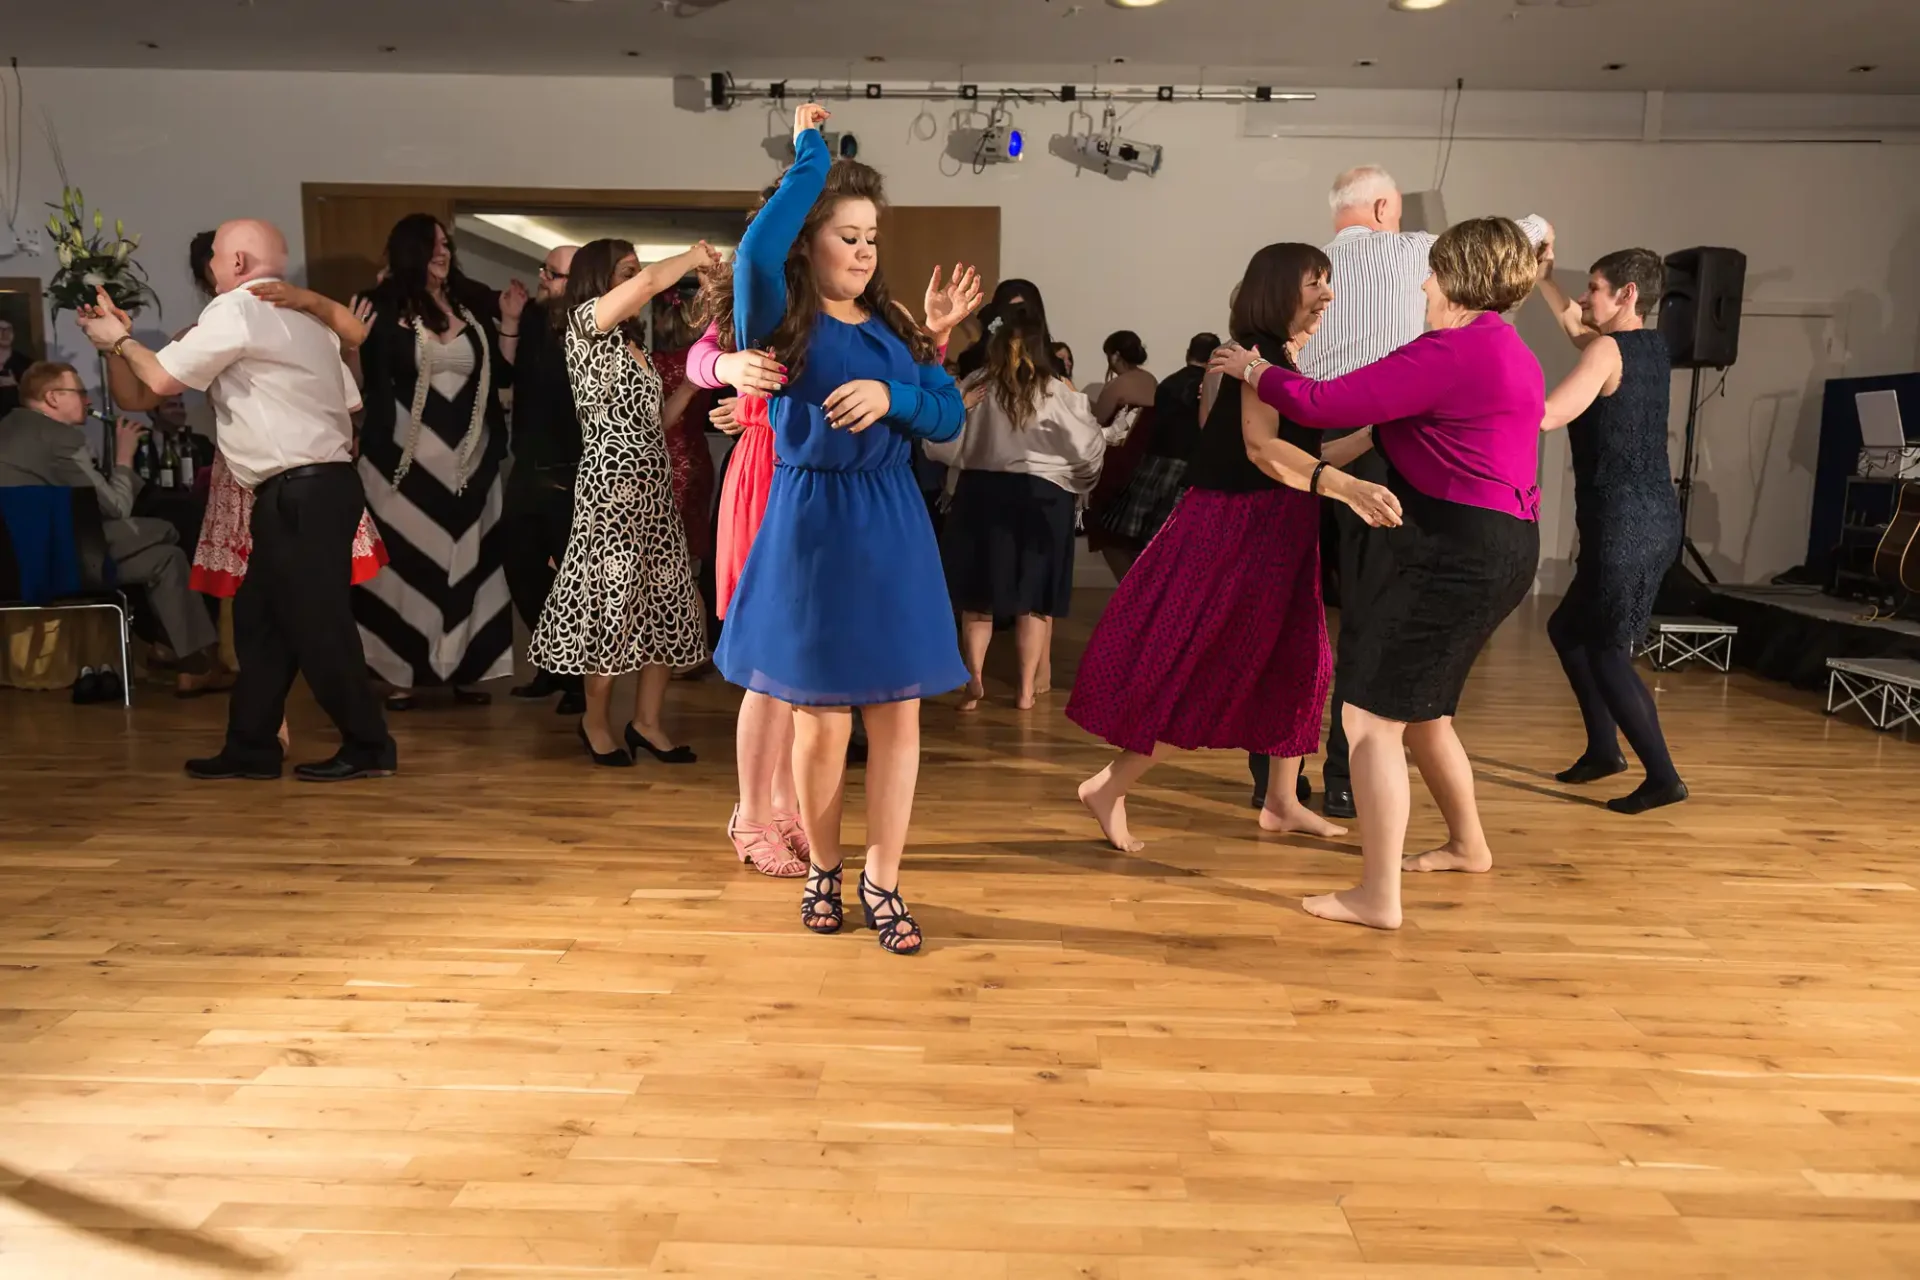 A young woman in a blue dress dances alone with a red ribbon at a lively party while other couples dance around her.